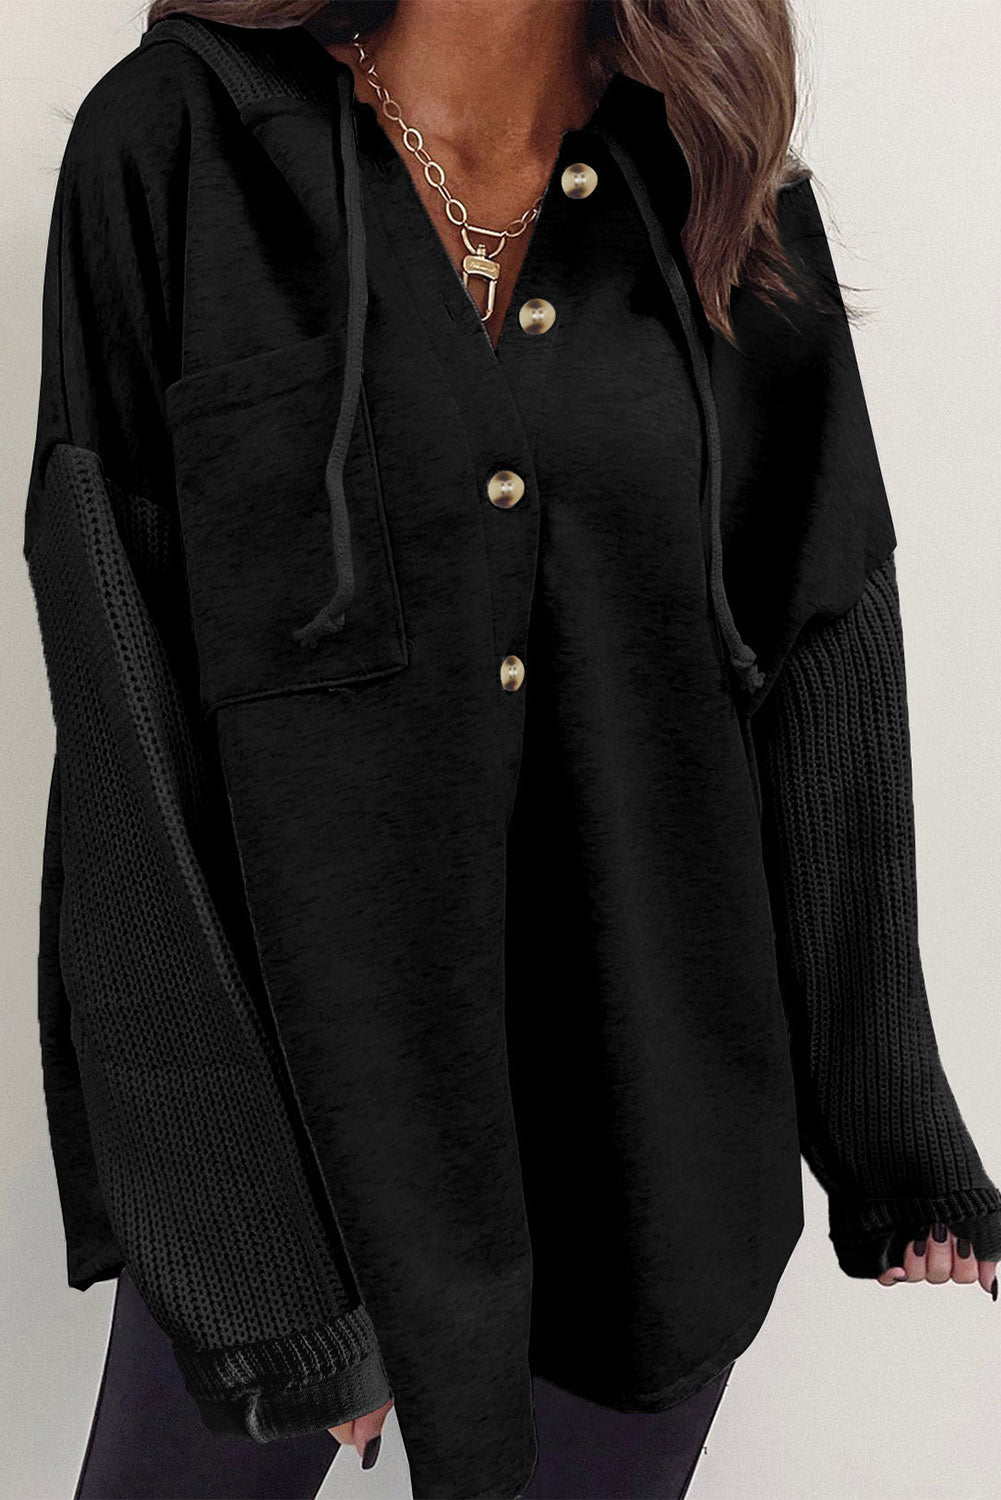 Gold flame button up contrast knitted sleeves hooded jacket - black / 2xl / 80% polyester + 20% cotton - outerwear